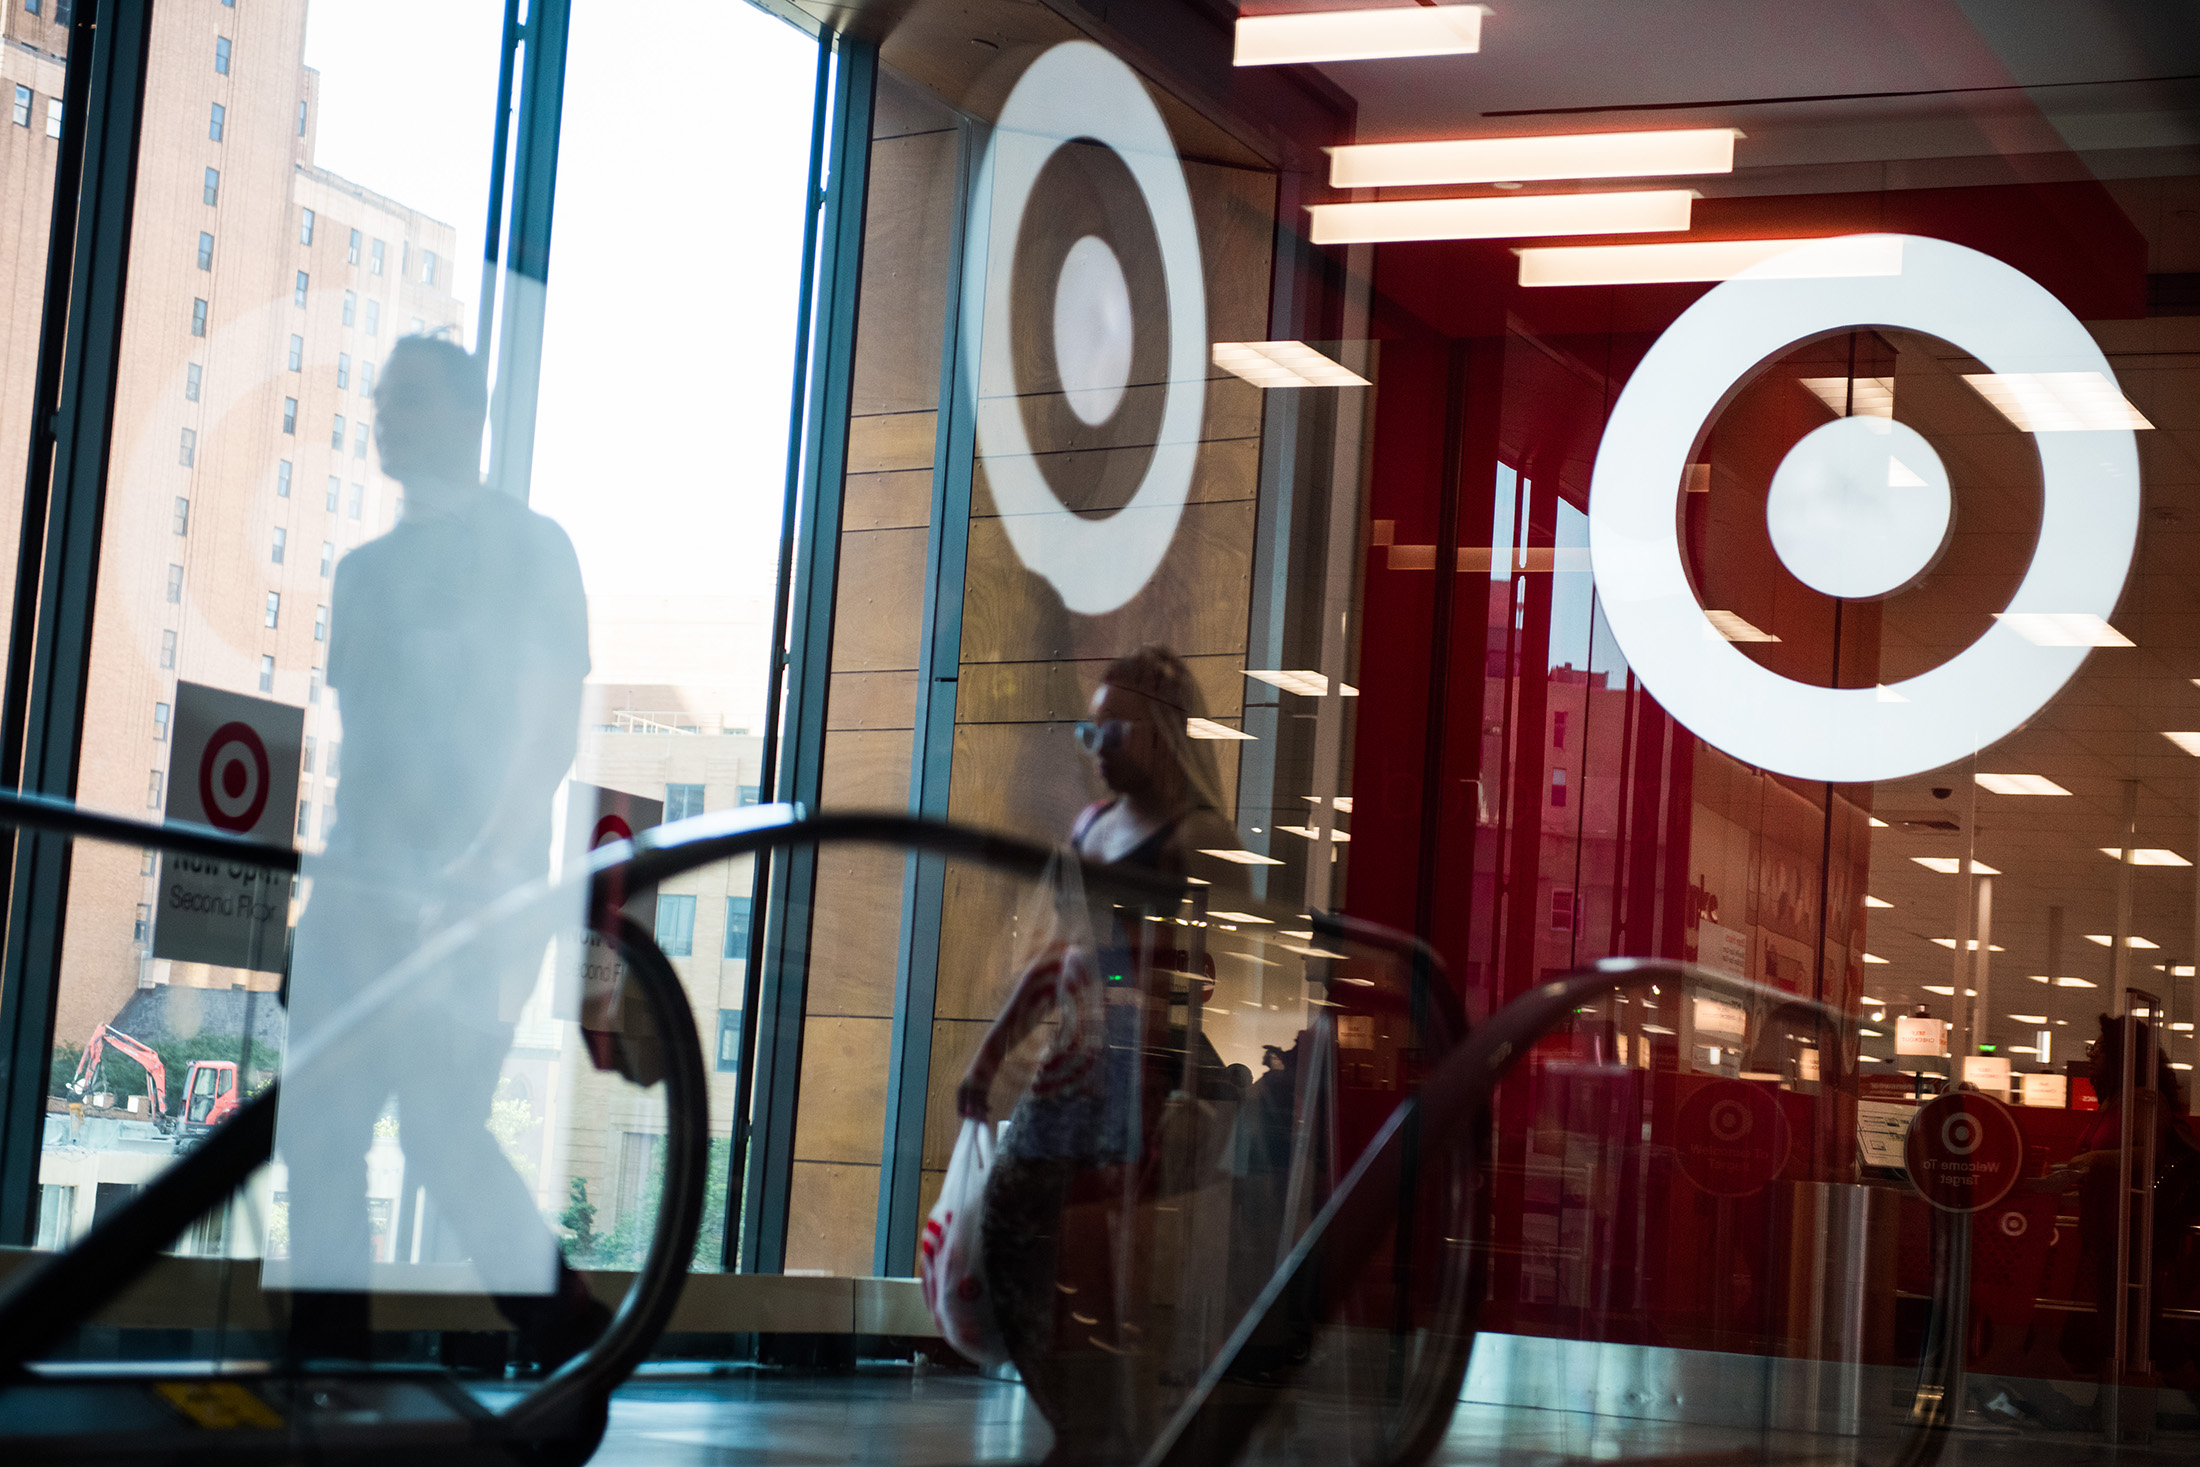 Pedestrians walk past the Target Corp. logo reflected in a window at City Point in the Brooklyn borough of New York, U.S., on Tuesday, July 18, 2017. Bloomberg is scheduled to release consumer comfort figures on July 20.
